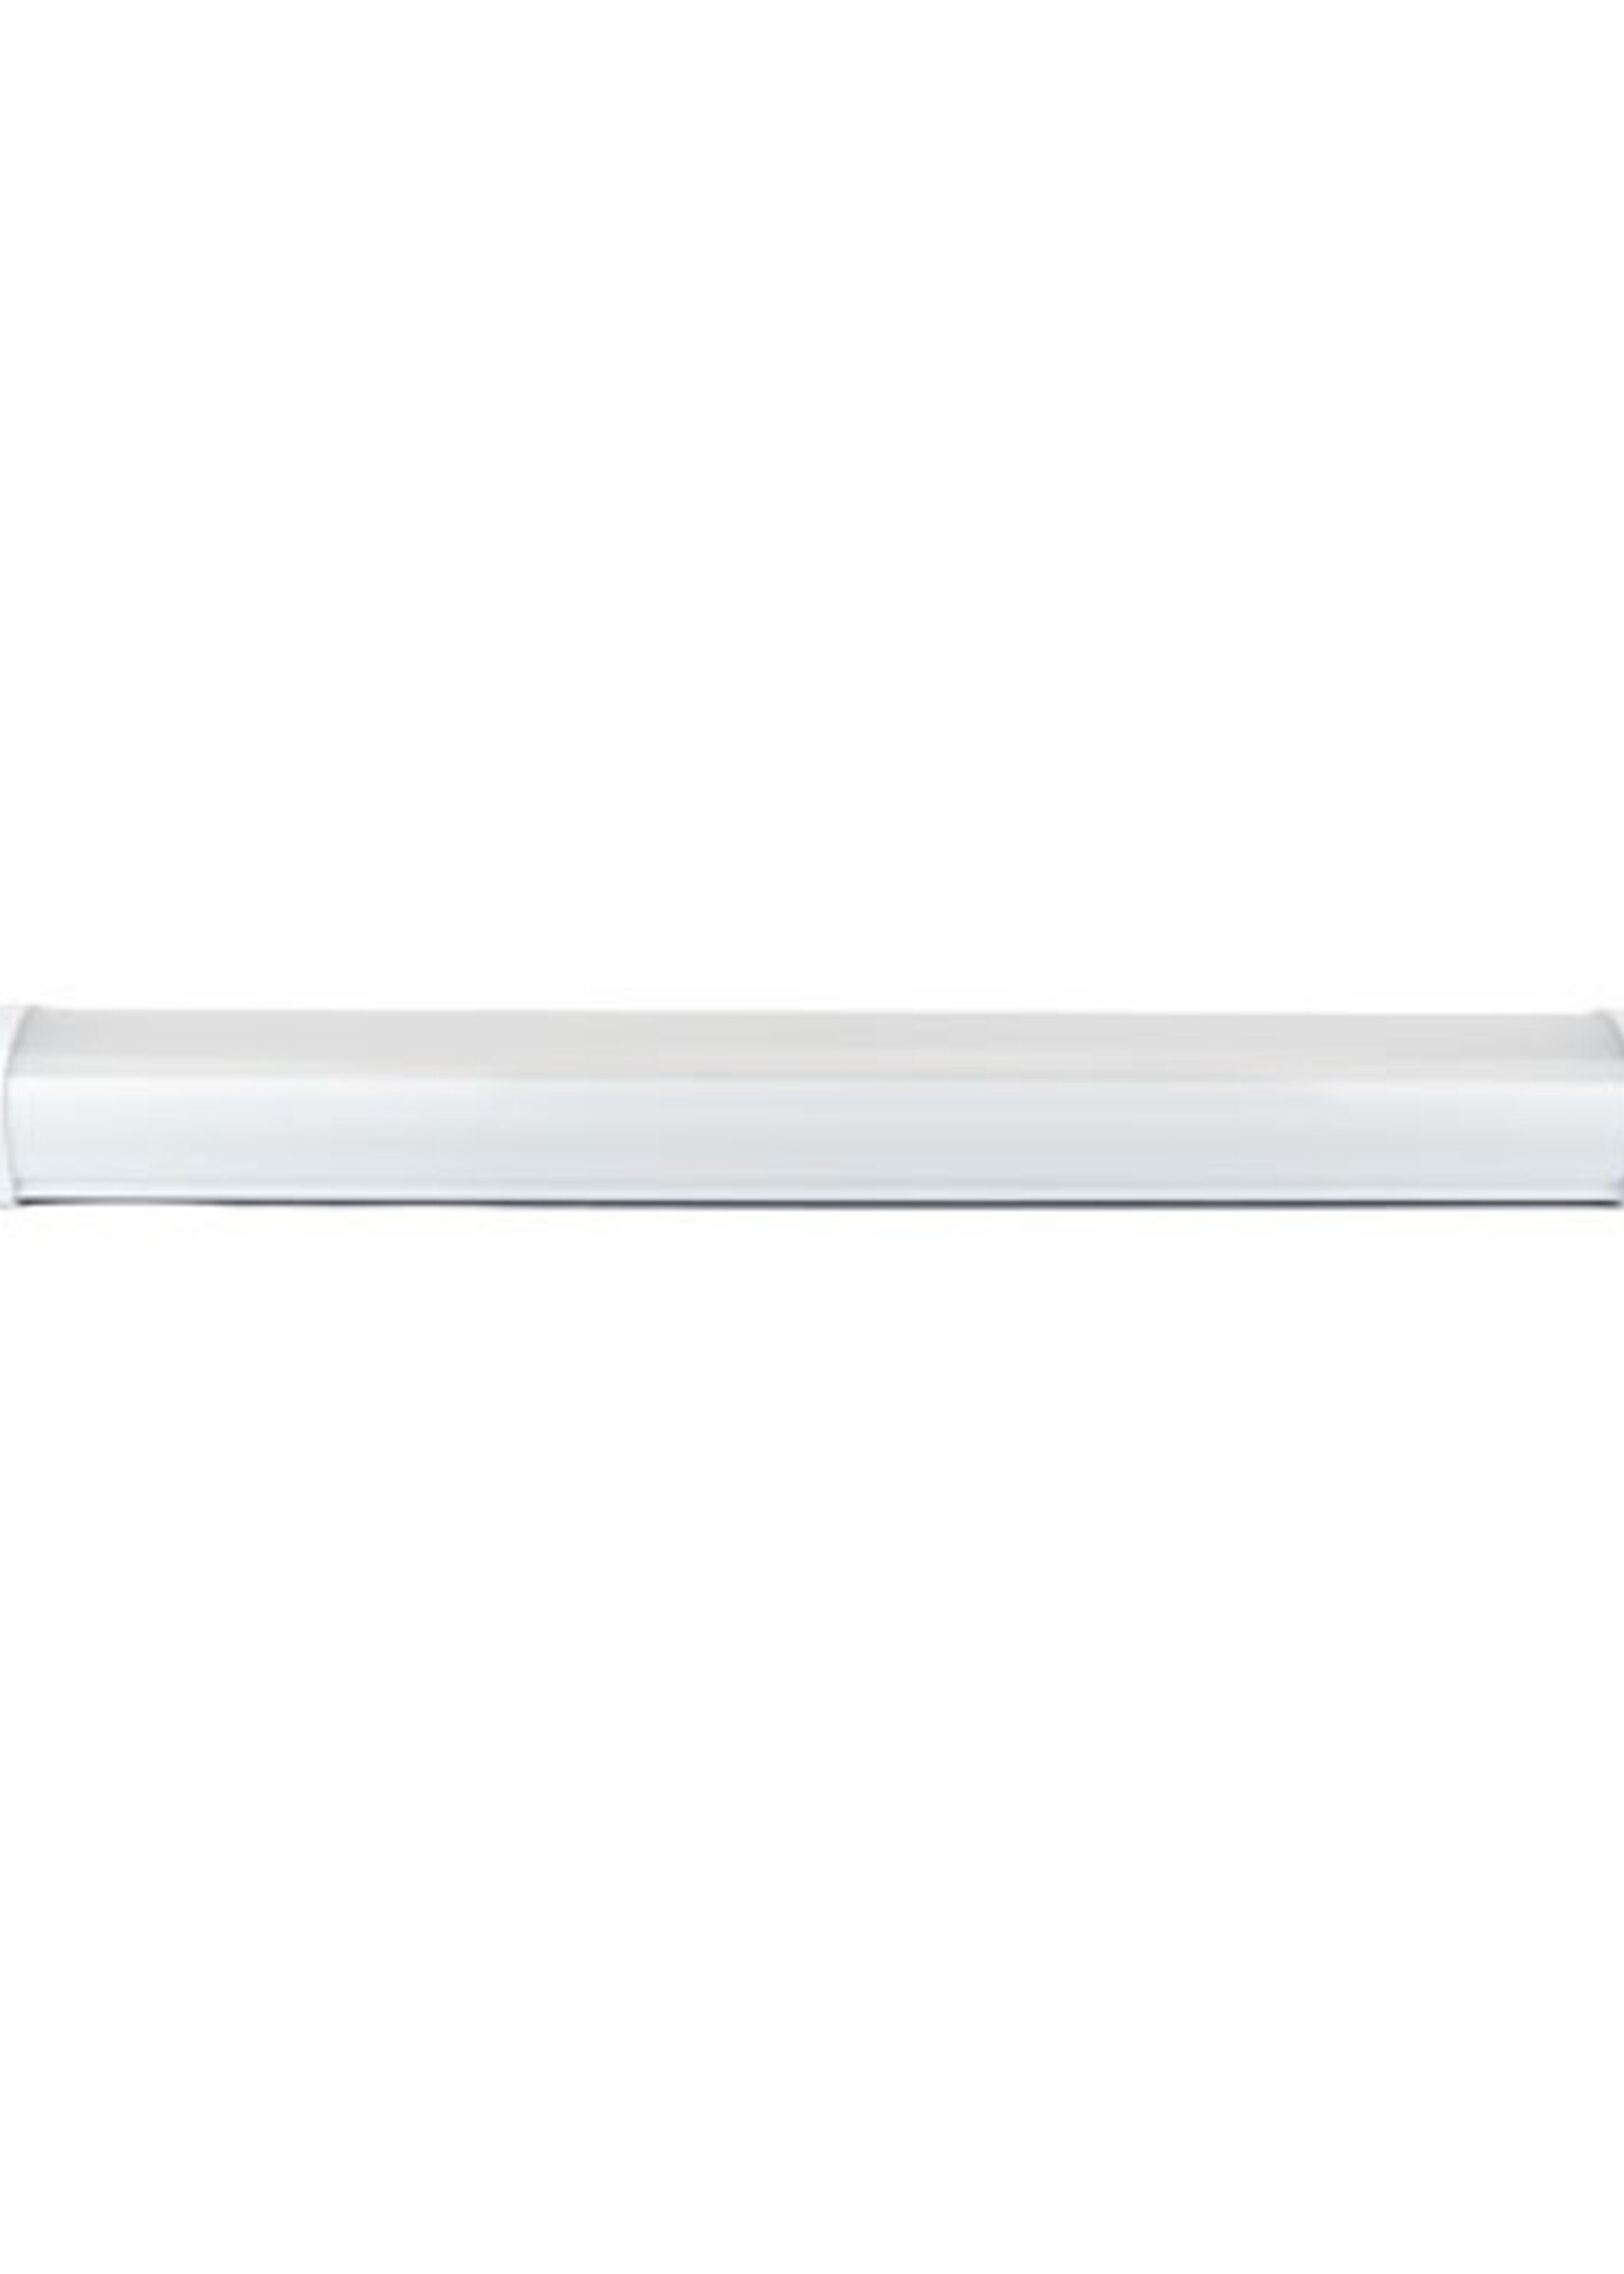 Philips CertaDrive Connectable LED Tri-proof IP65 water resistant 65cm 18W Philips driver